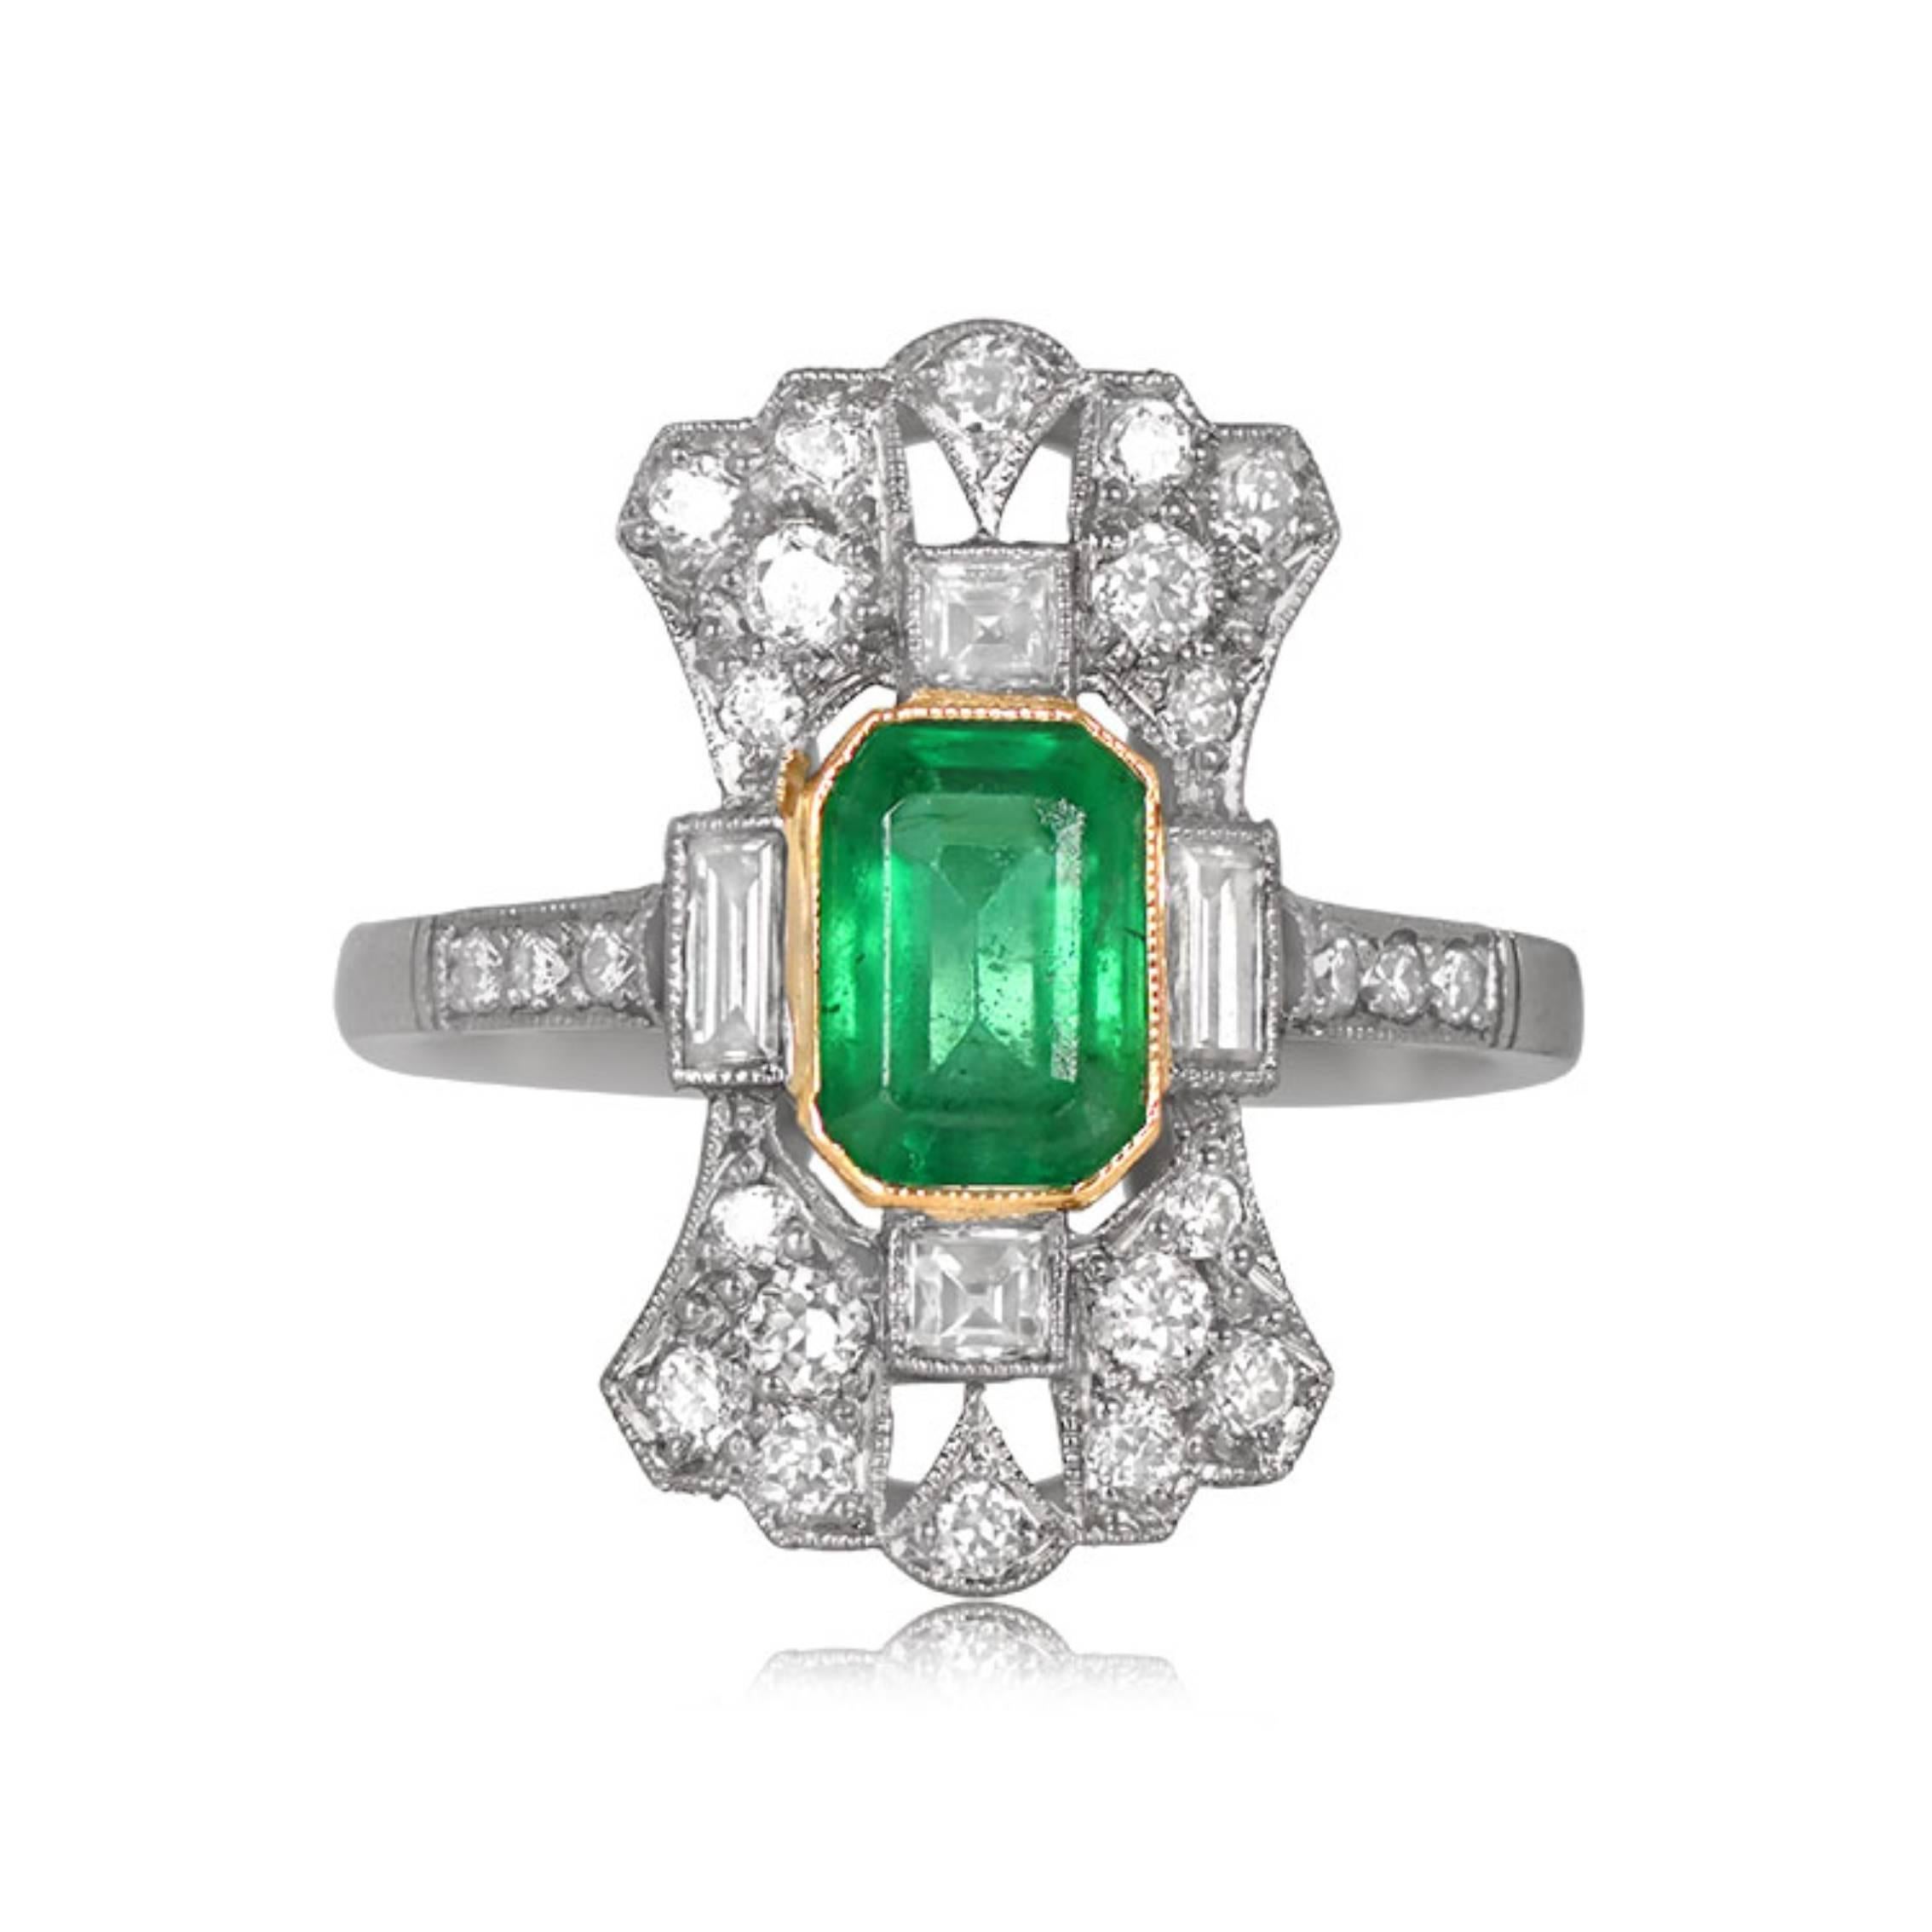 A captivating 1.00-carat natural Colombian emerald in an elongated emerald cut graces this exquisite platinum ring. The emerald's deep green saturation is complemented by antique diamonds. This unique piece is handcrafted in platinum, and the bezel